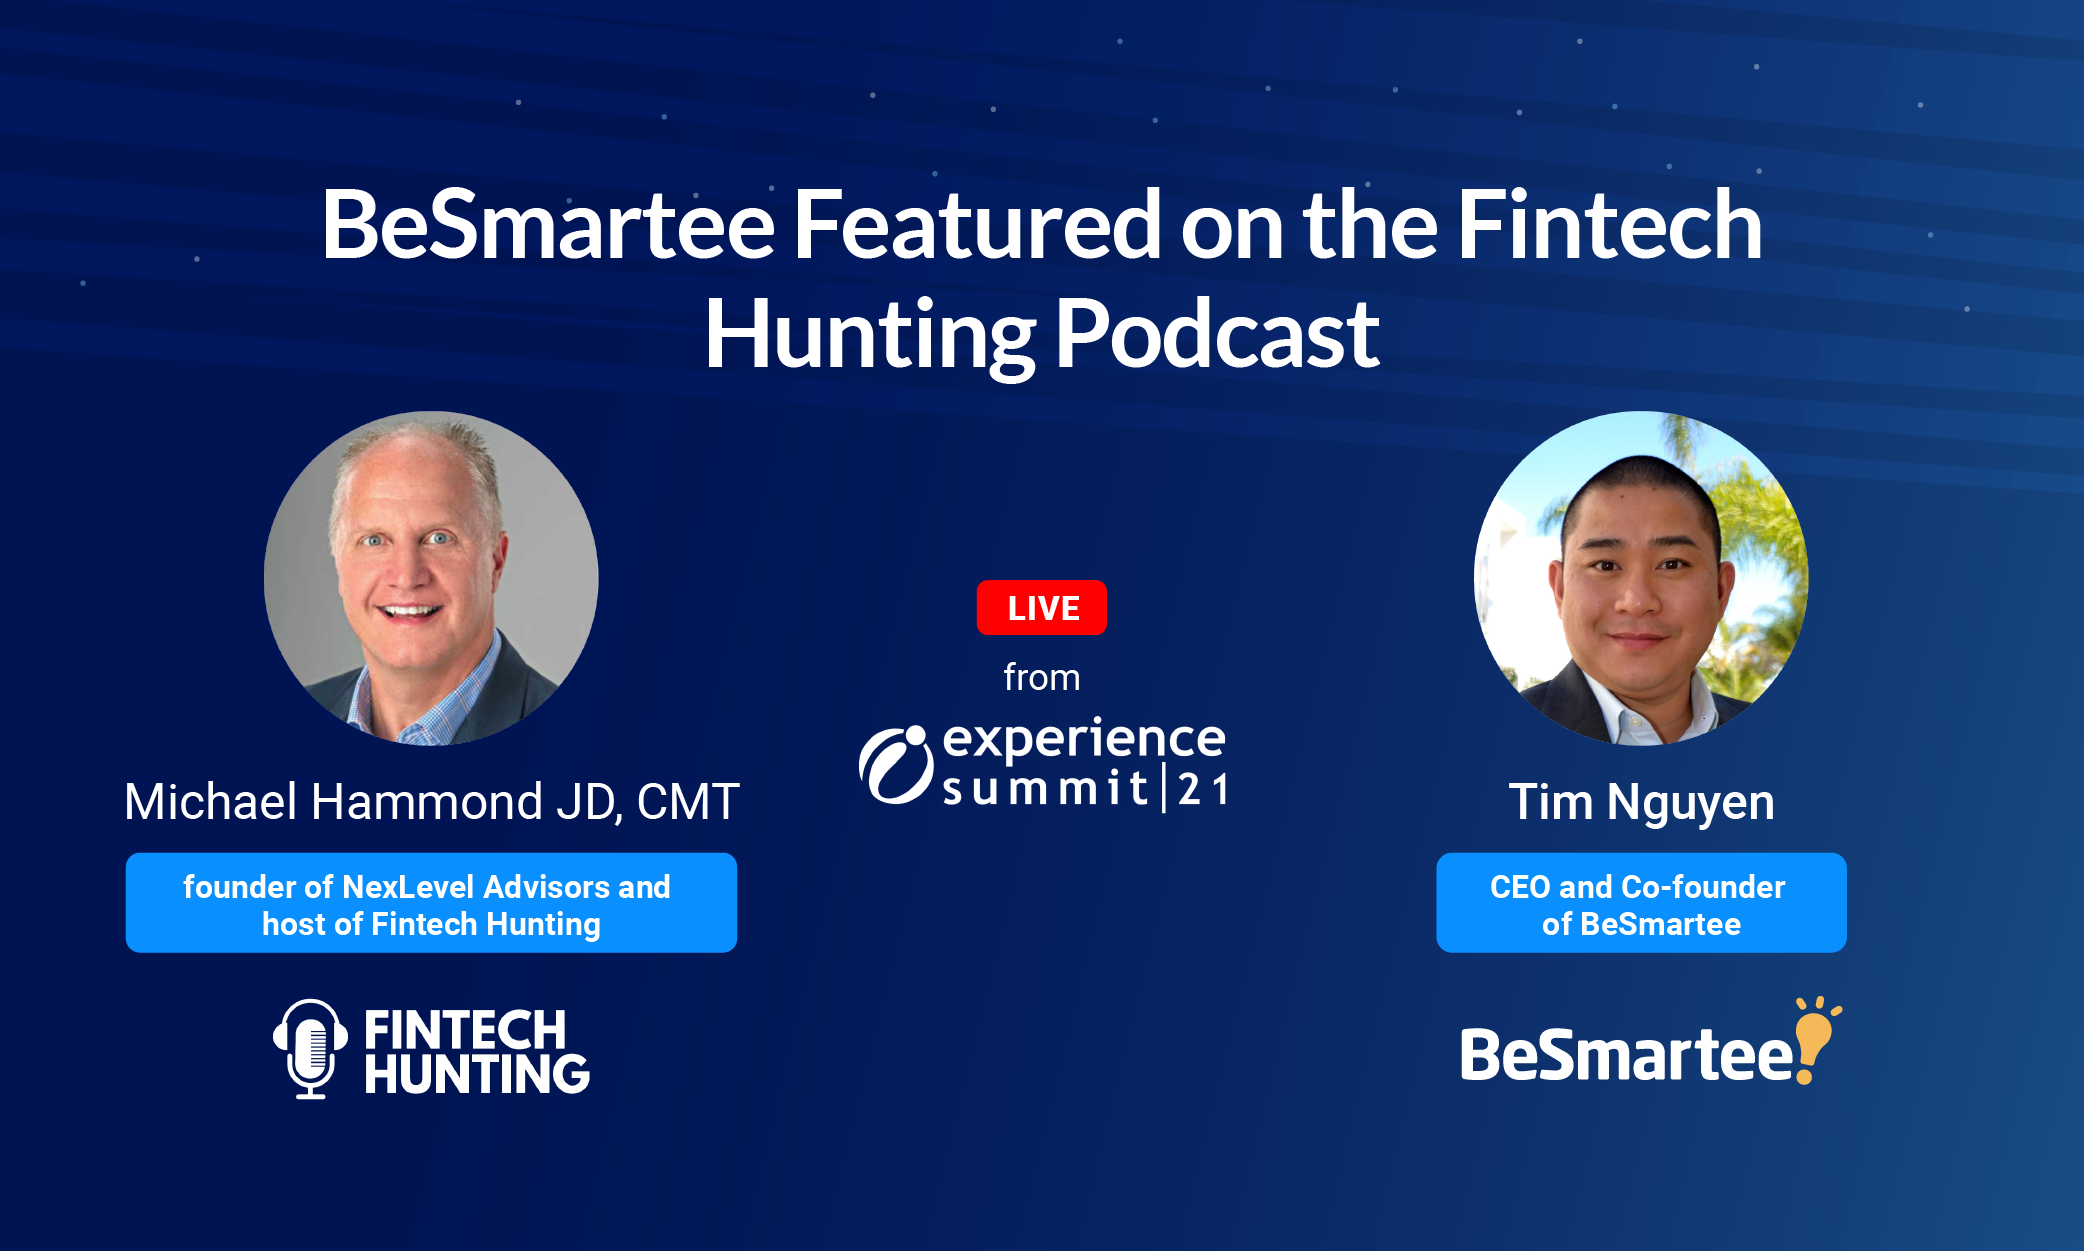 BeSmartee Featured on the Fintech Hunting Podcast